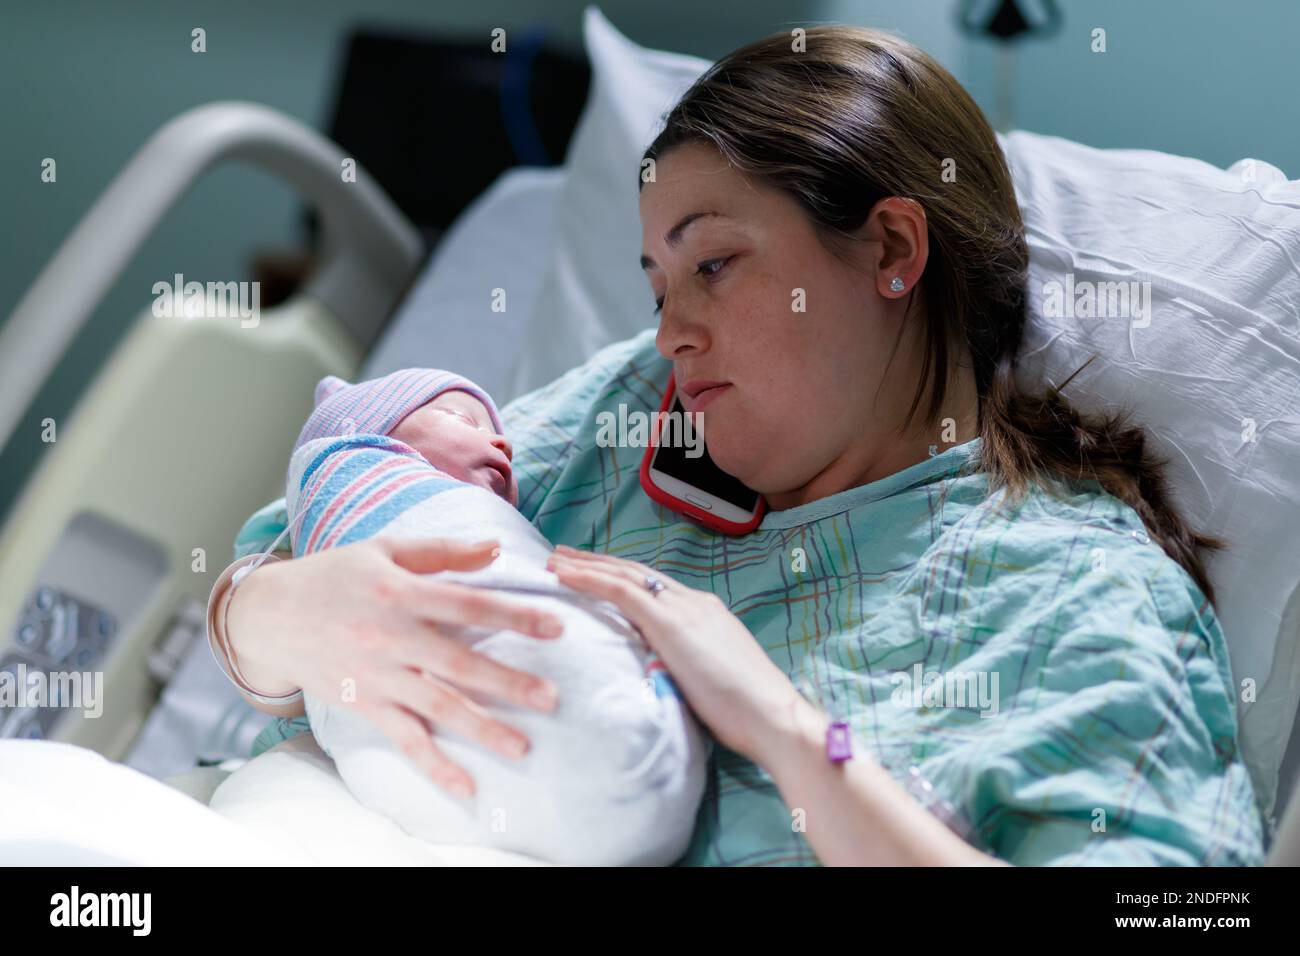 mother and her newborn baby captured in a hospital setting as the mother talks on her cell phone Stock Photo